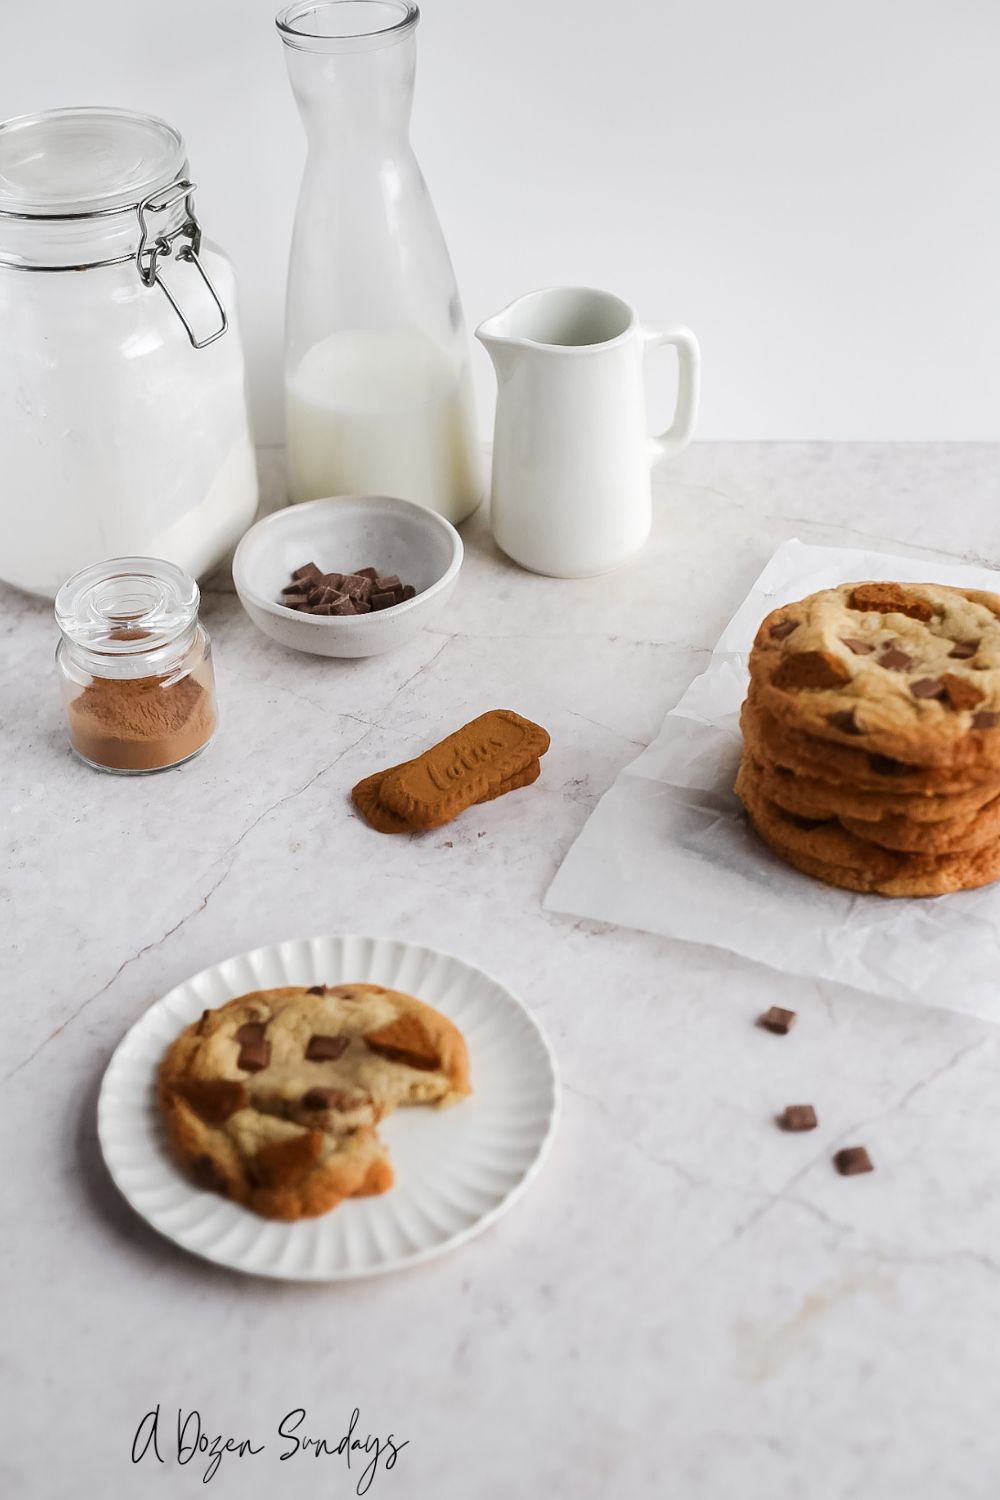 Lotus Biscoff Cookies with Chocolate Chips